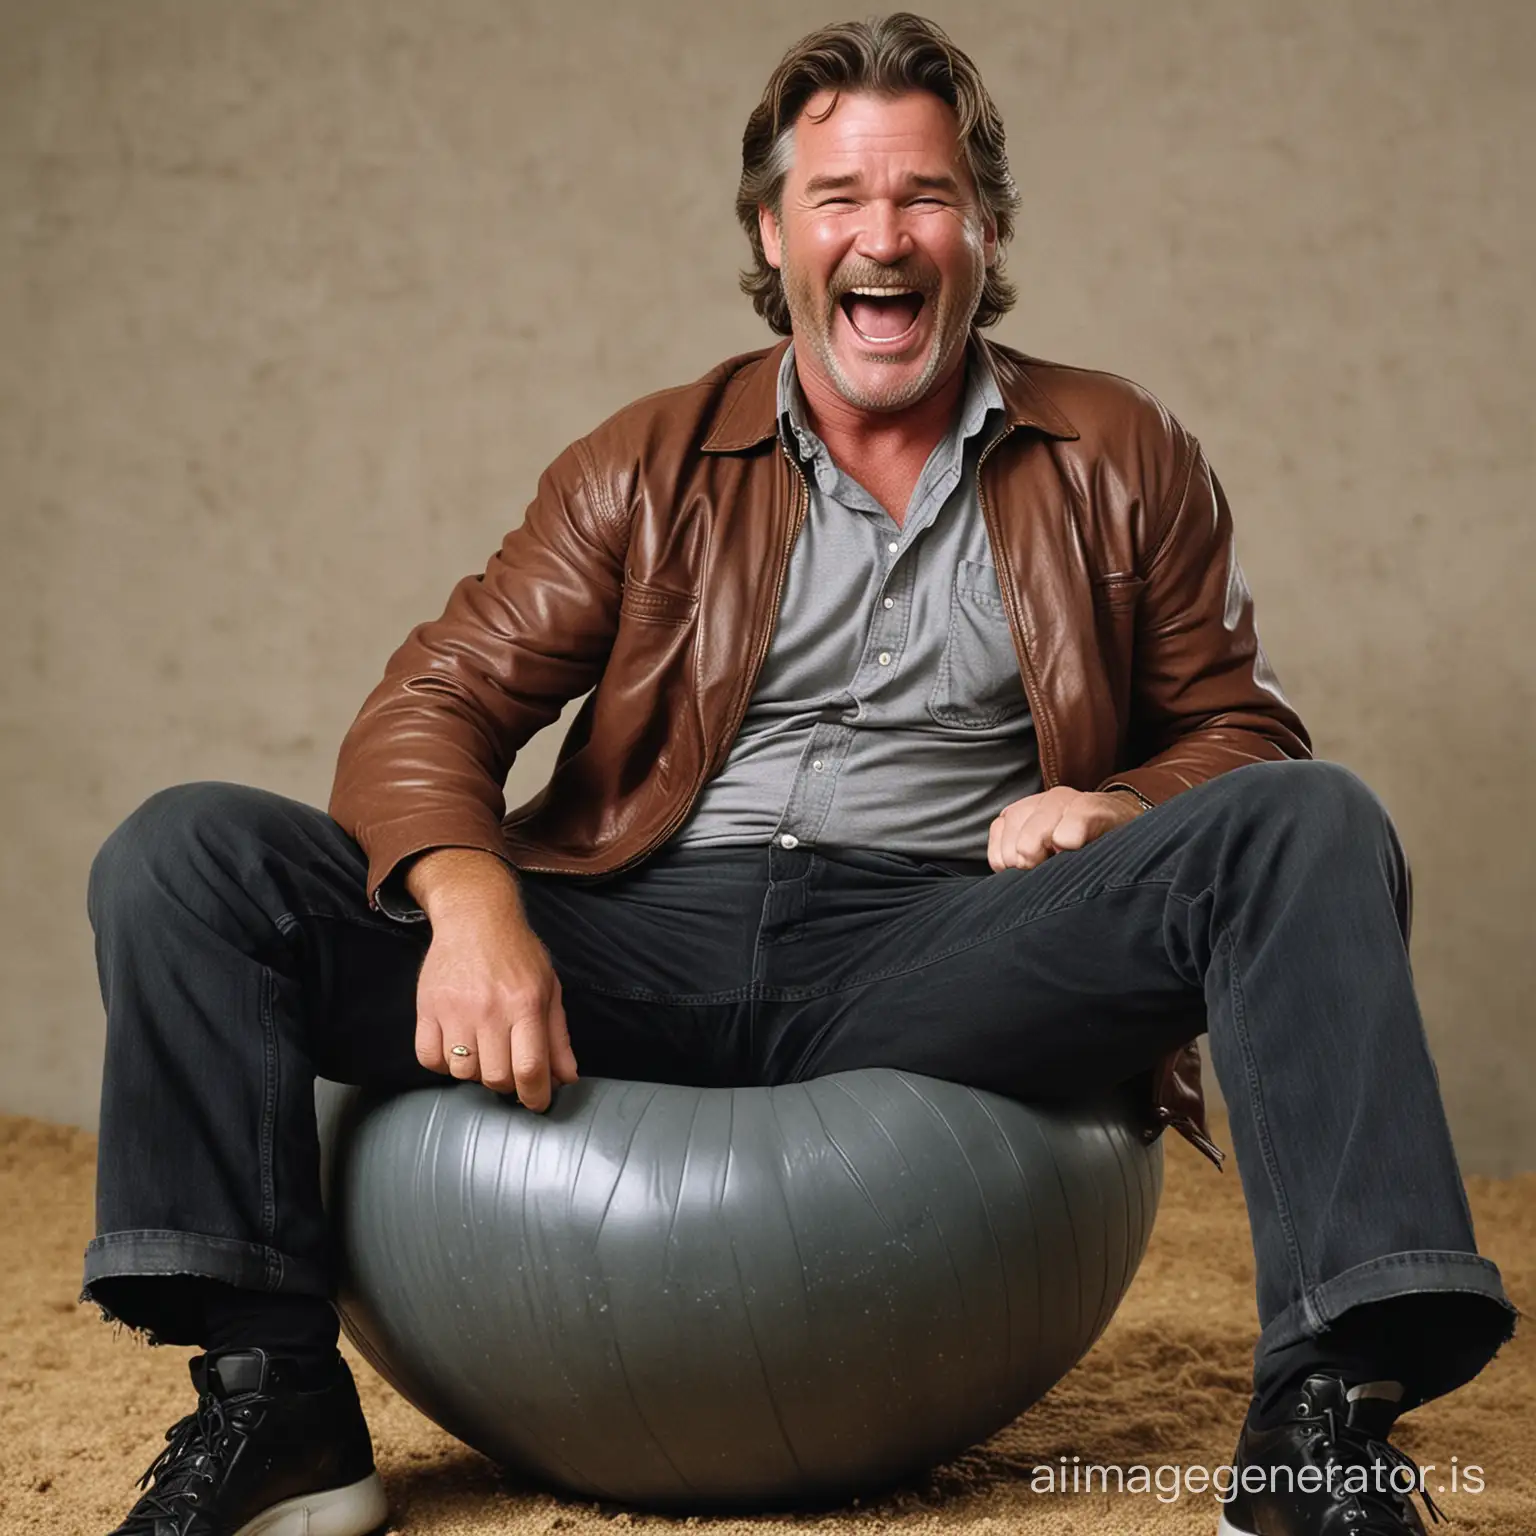 Kurt-Russell-Laughing-on-a-Spacehopper